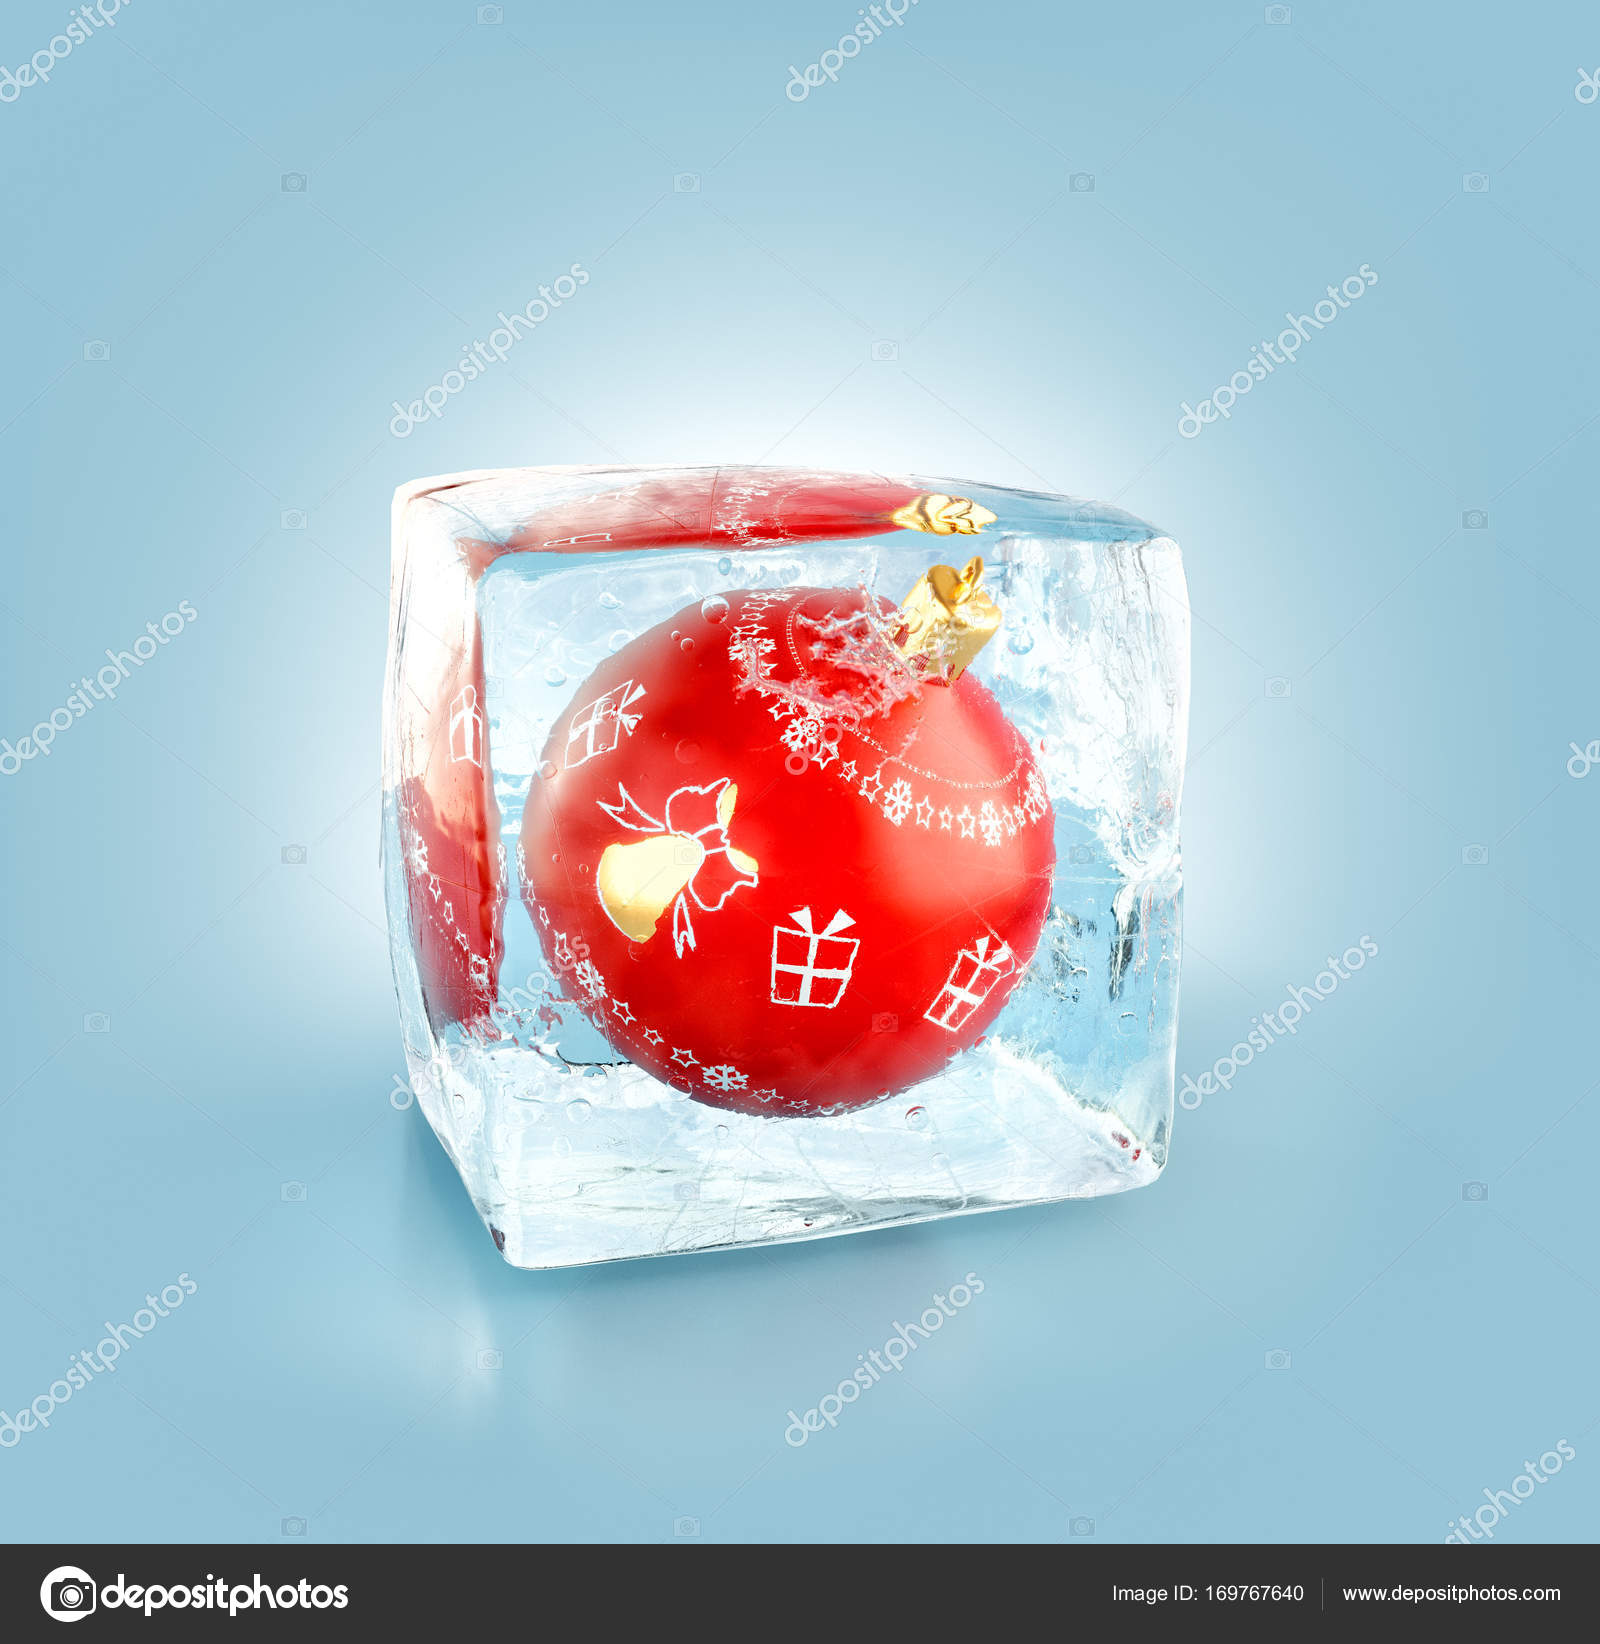 Beautiful red Christmas ball inside ice cube. Stock Photo by